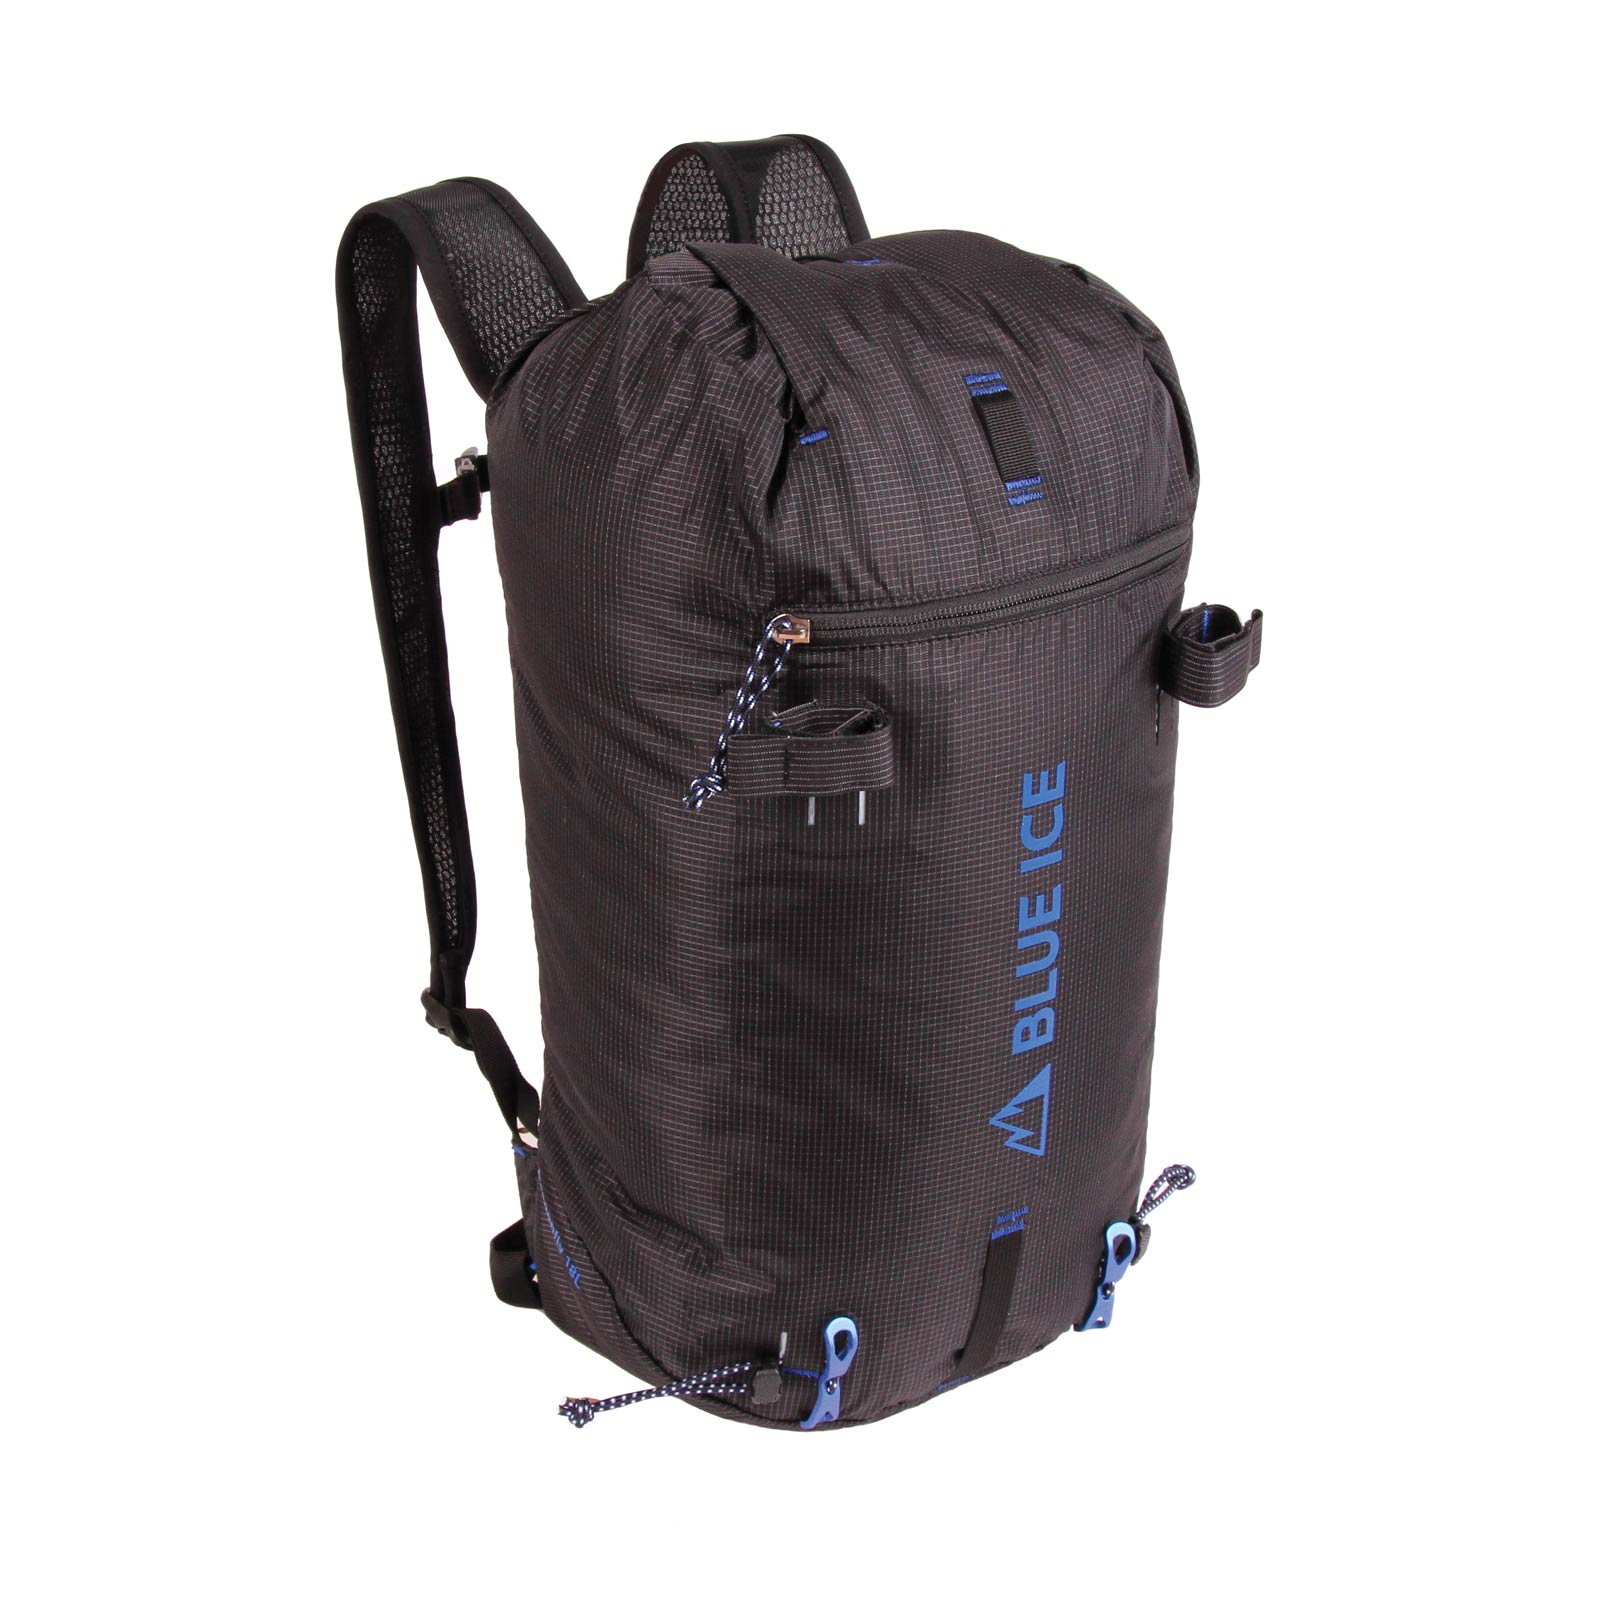 Blue Ice Dragonfly 18L Pack